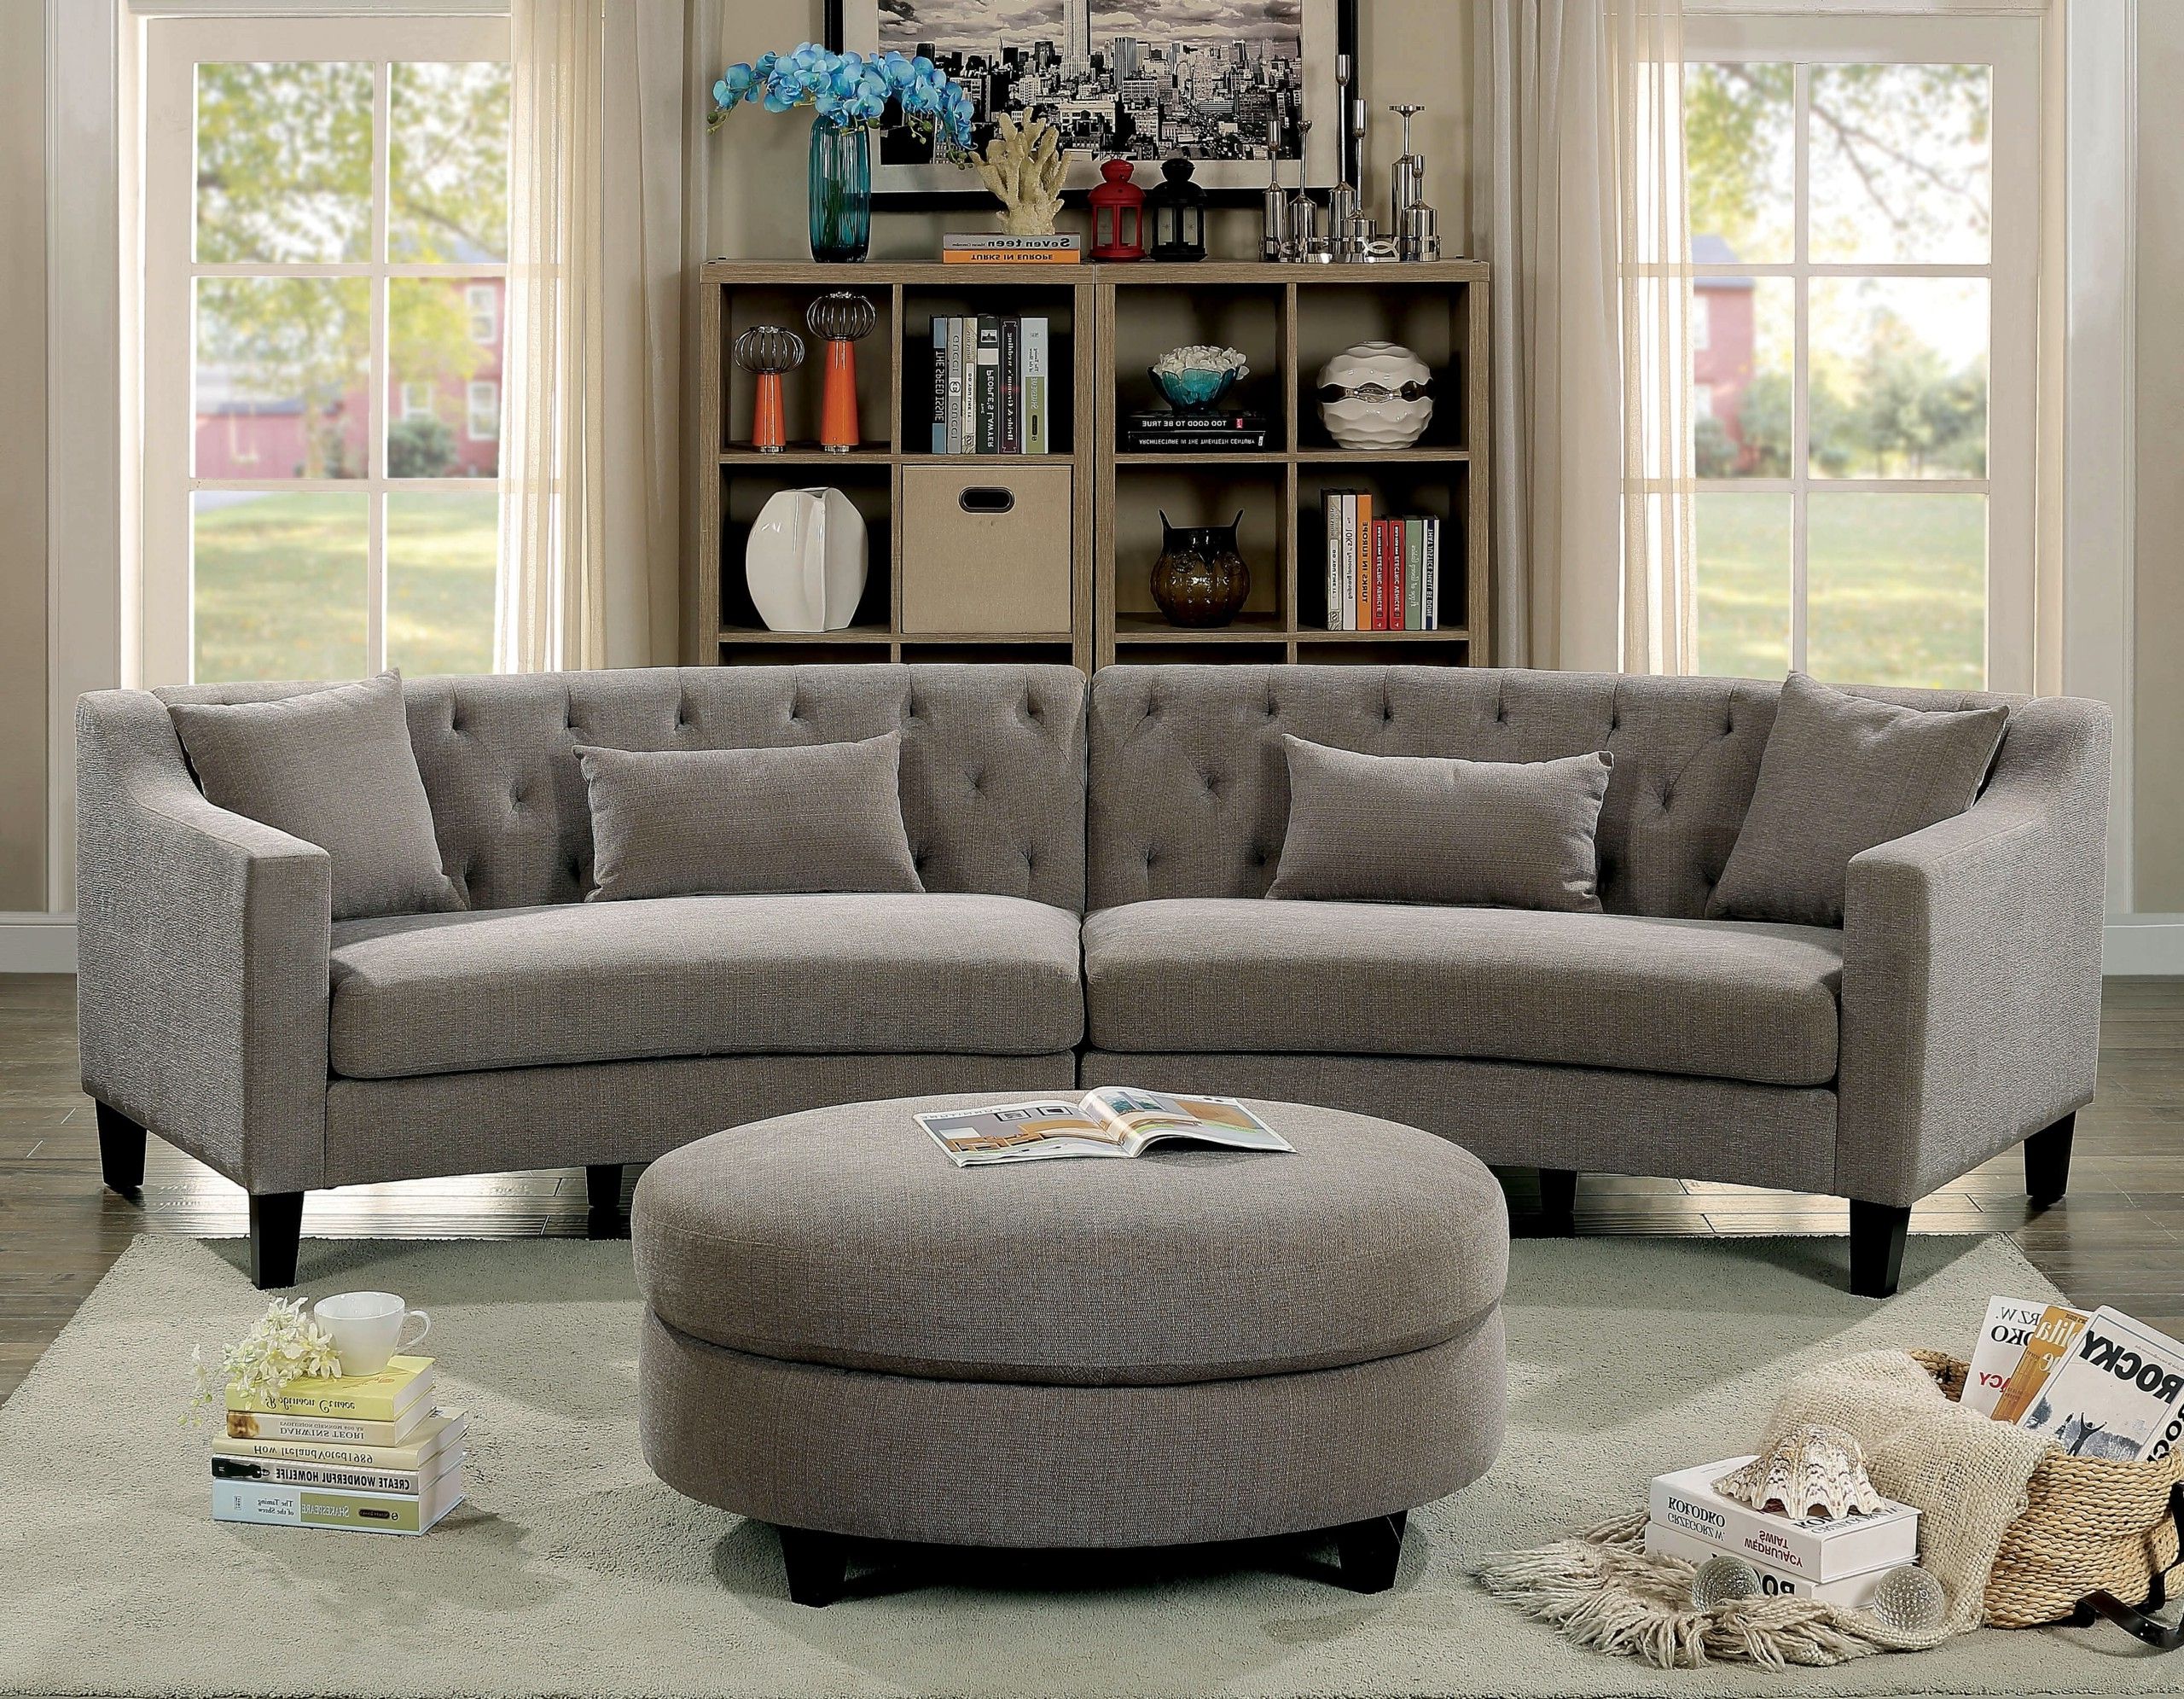 Small Curved Sectional Sofas / Couches – Ideas On Foter In Fashionable 3 Piece Curved Sectional Set (Photo 11 of 15)